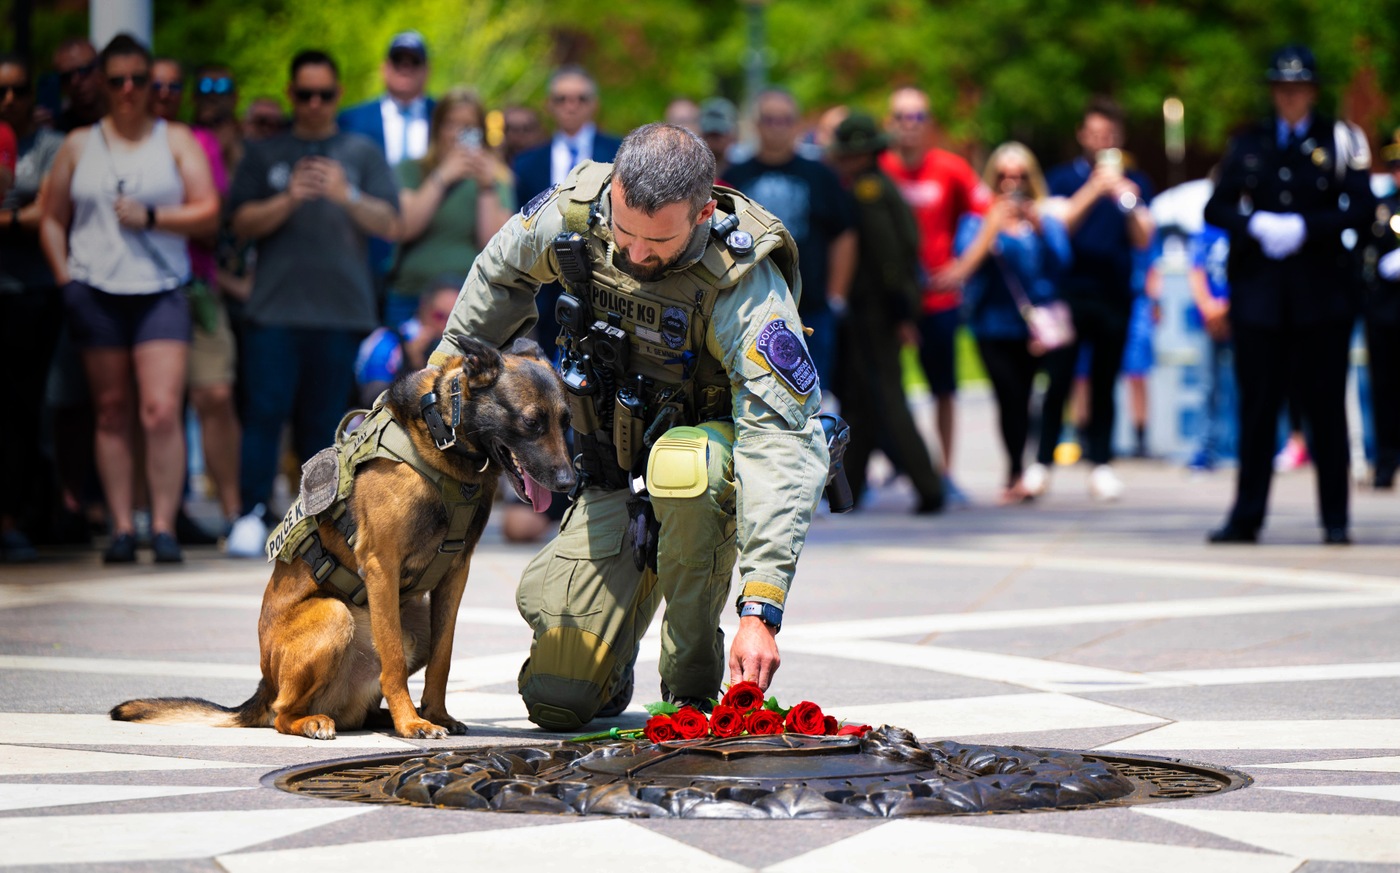 Laying a Rose at the National Police K9 Memorial Service on May 13 in Washington, D.C.